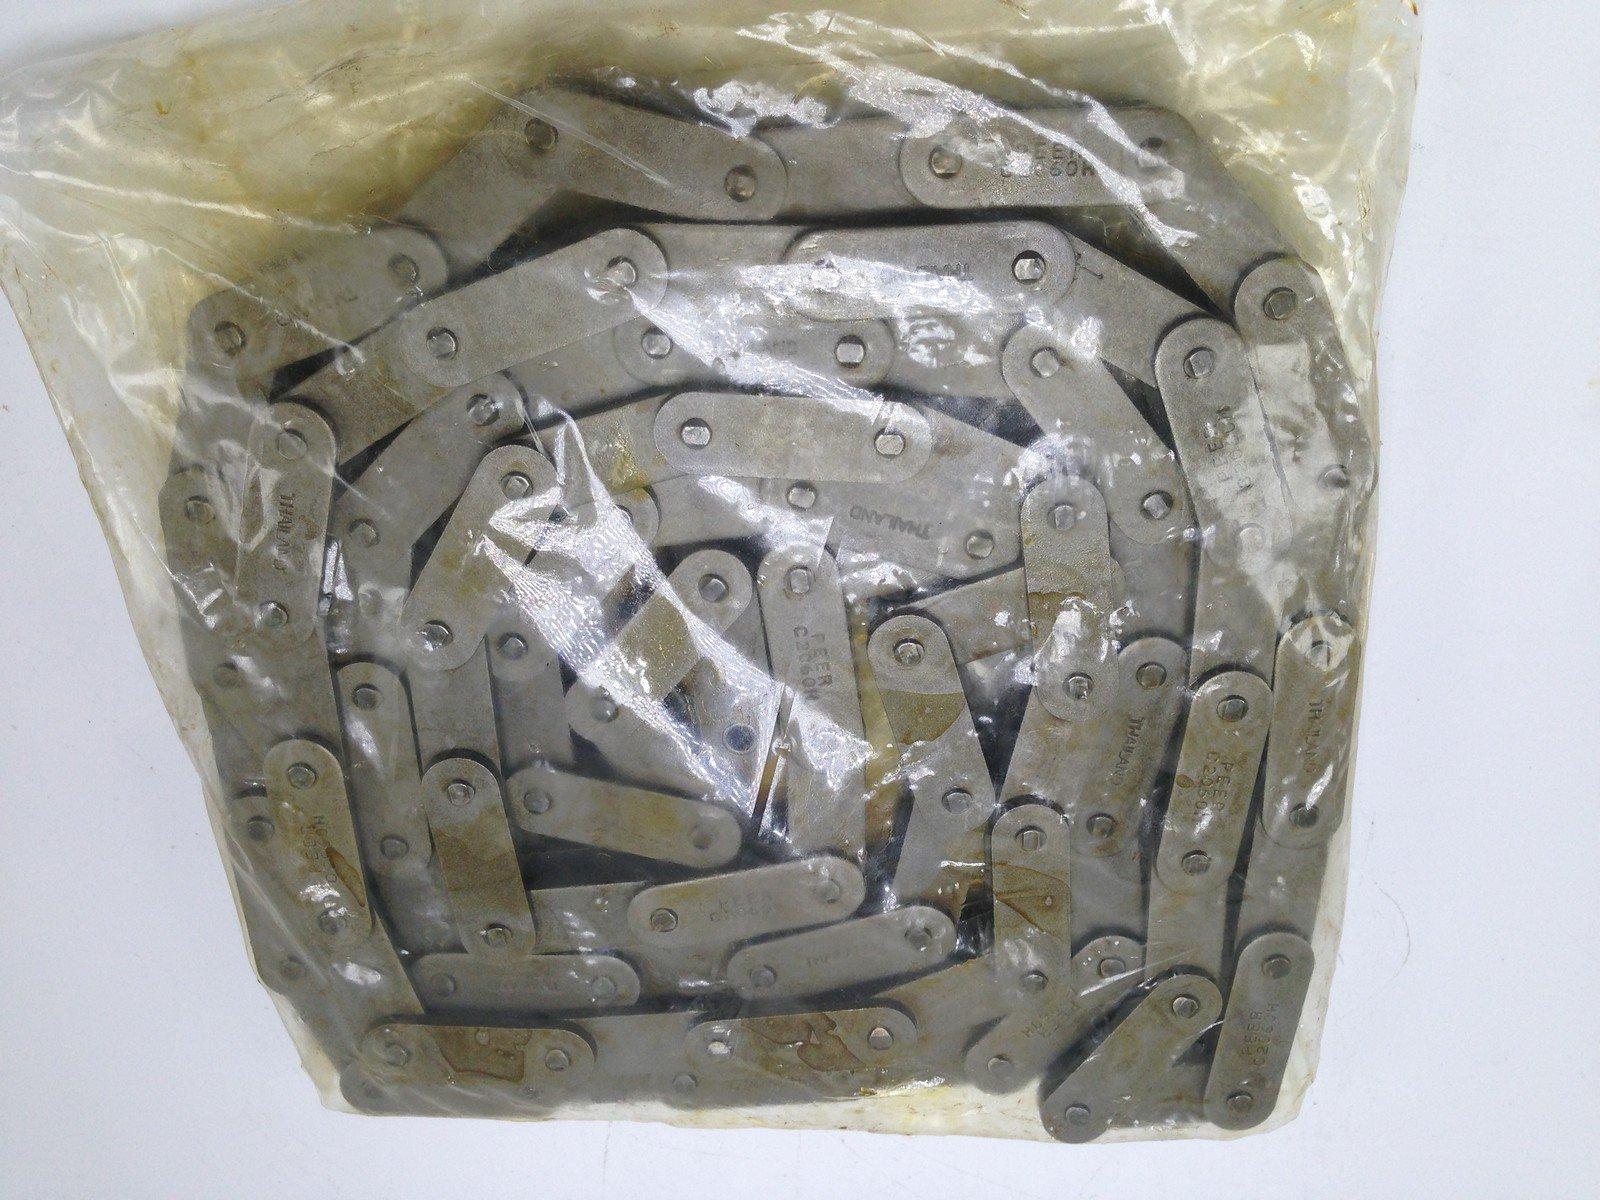 NEW Peer Chain Company C2060HR Chain Size 2060, 1-1/2 in Pitch, P/N C2060HR X 10